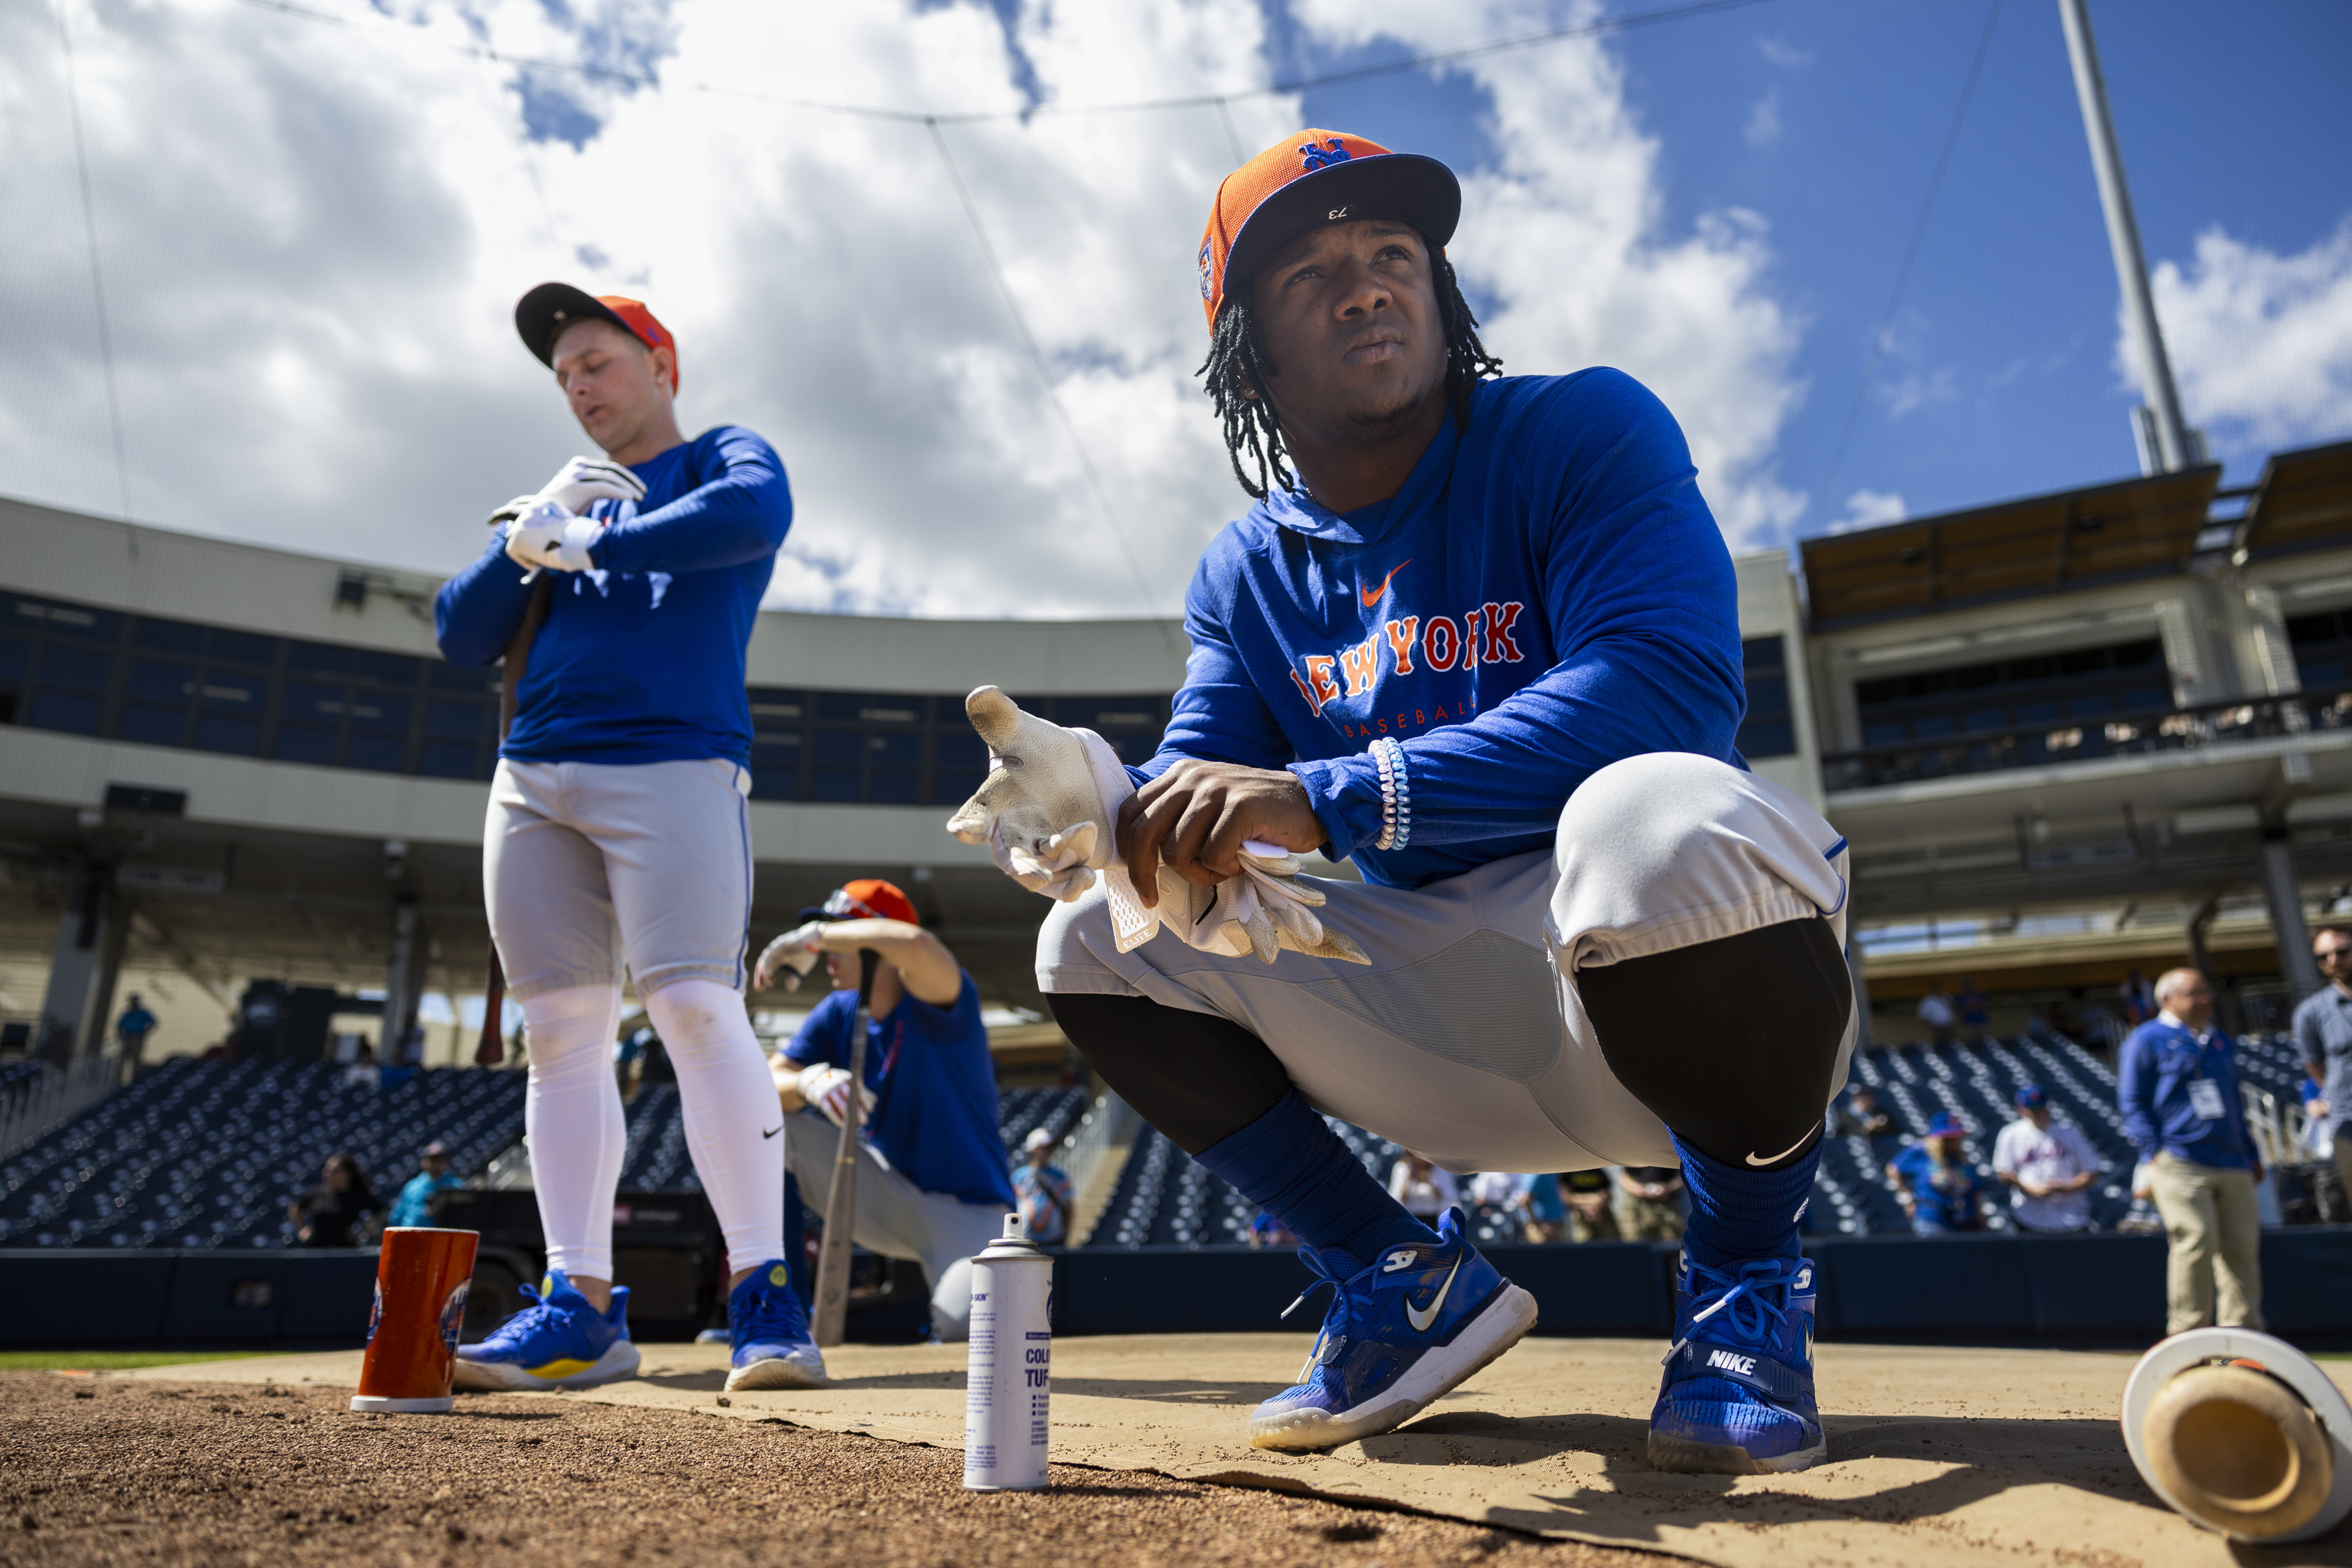 Jett Williams (l.) and Luisangel Acu?a (r.) were among the Mets' first round of spring training cuts on Sunday.